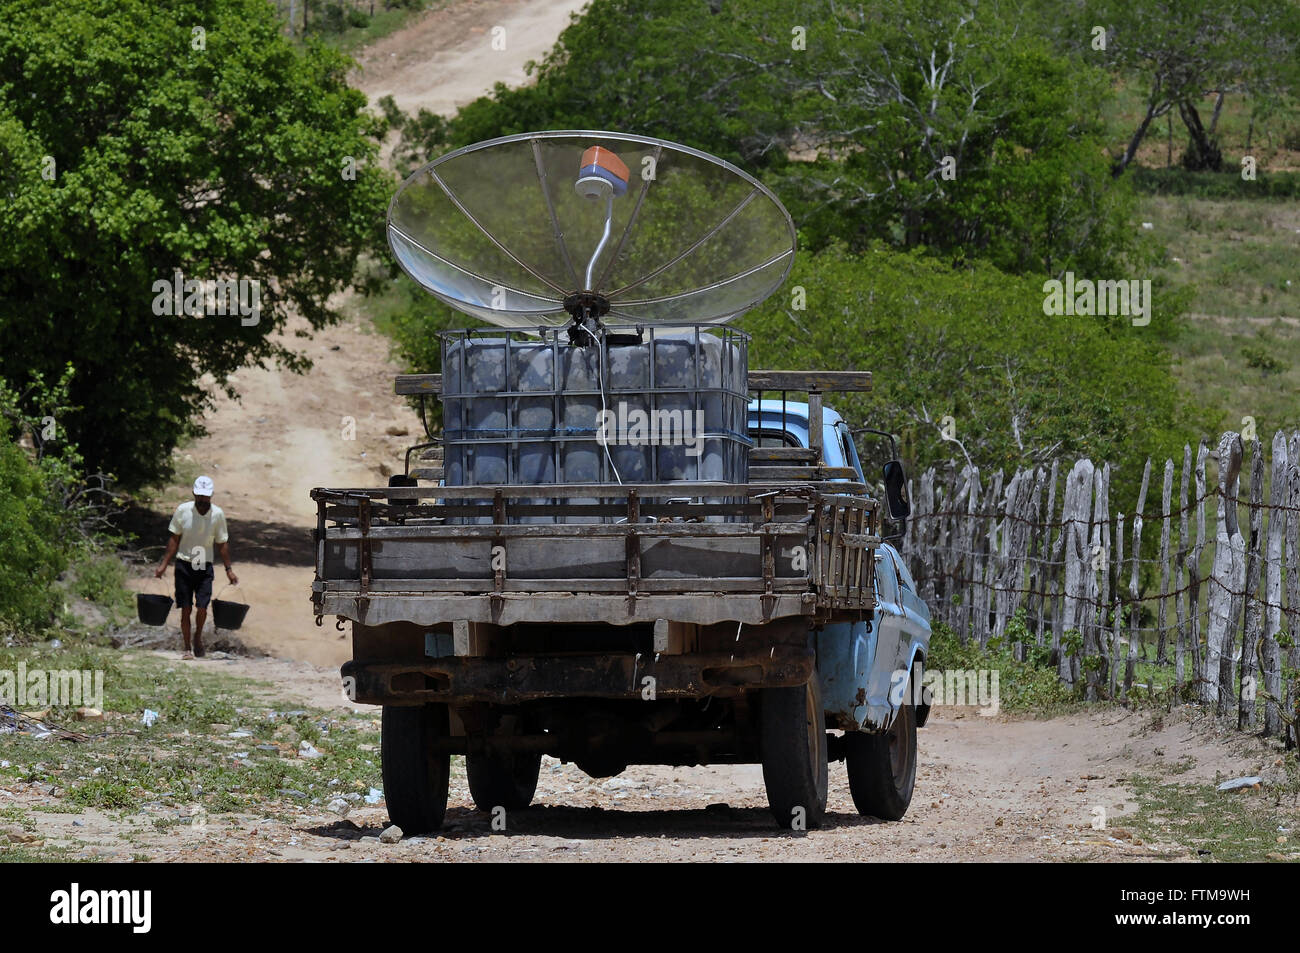 Parabolic antenna being transported in a rural town Stock Photo